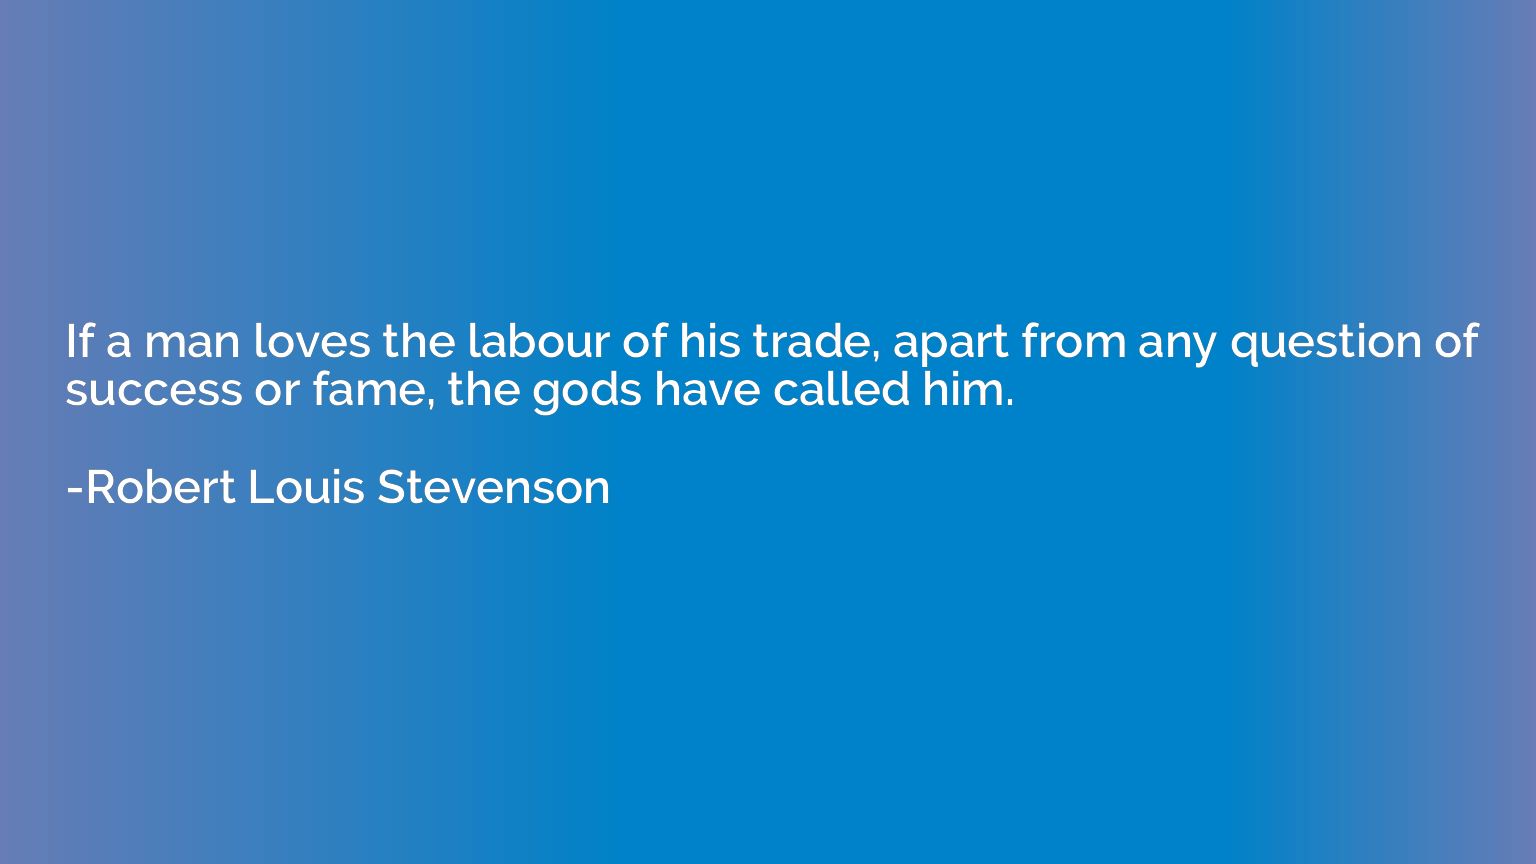 If a man loves the labour of his trade, apart from any quest